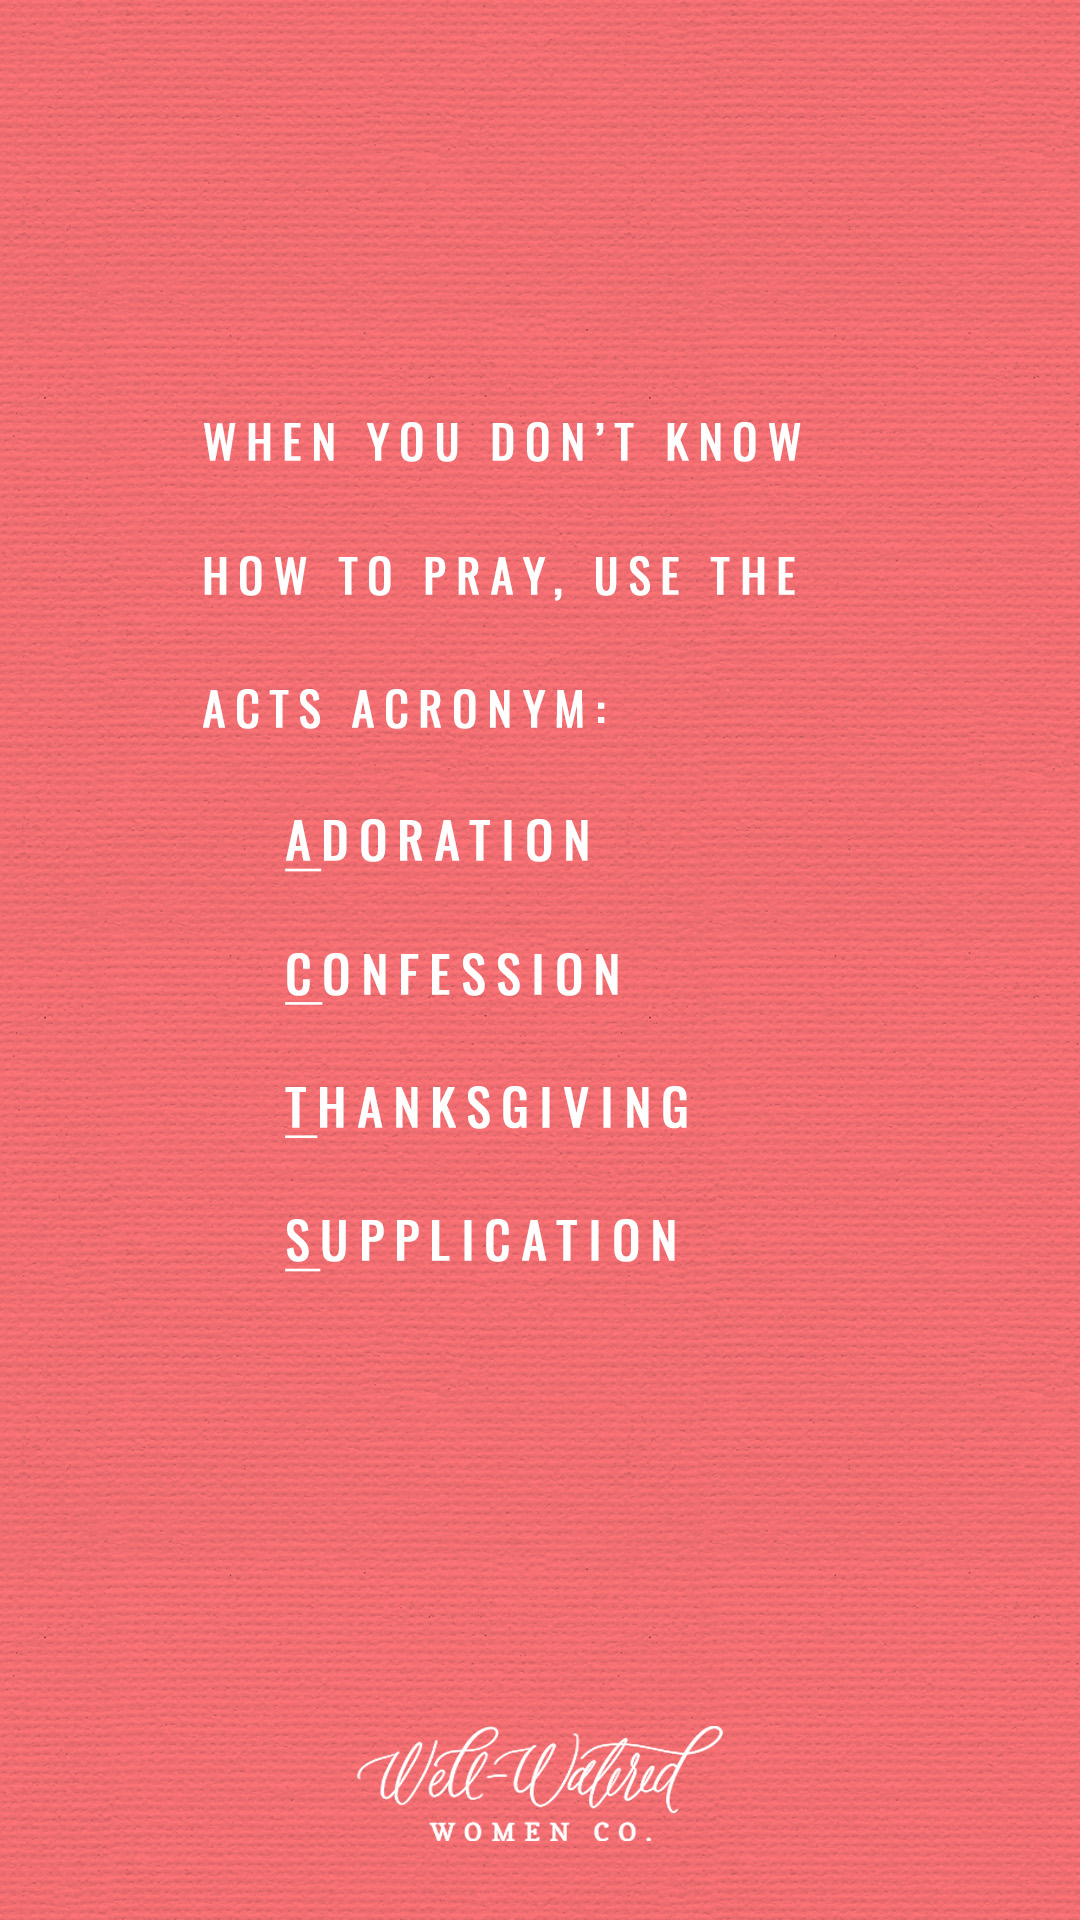 Well Watered Women Blog | Pray With the ACTS acronym